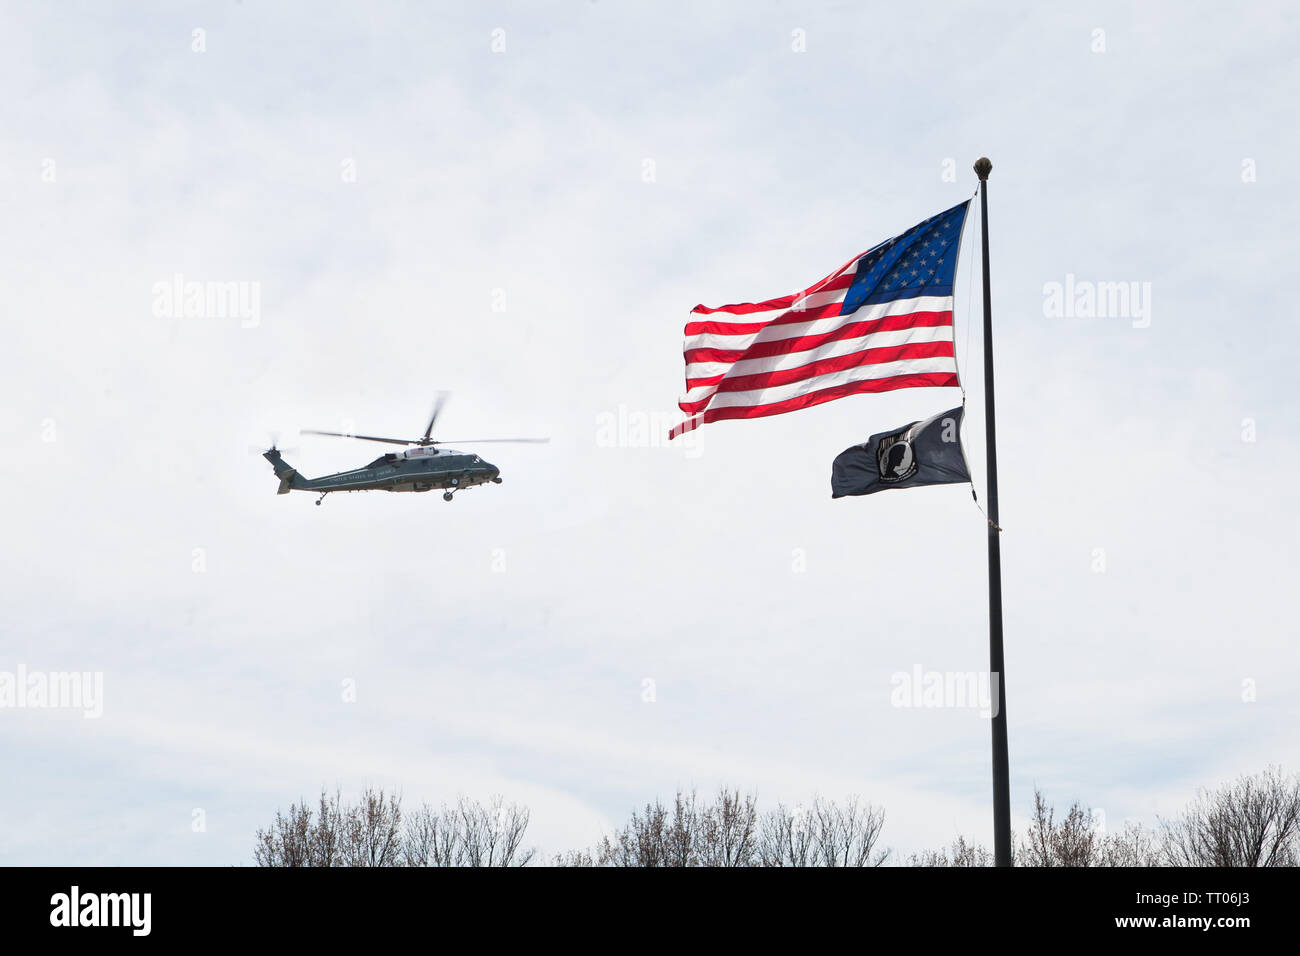 Marine One flying over the Tidal Basin in Washington D.C. with the U.S. and P.O.W. M.I.A flags. Stock Photo